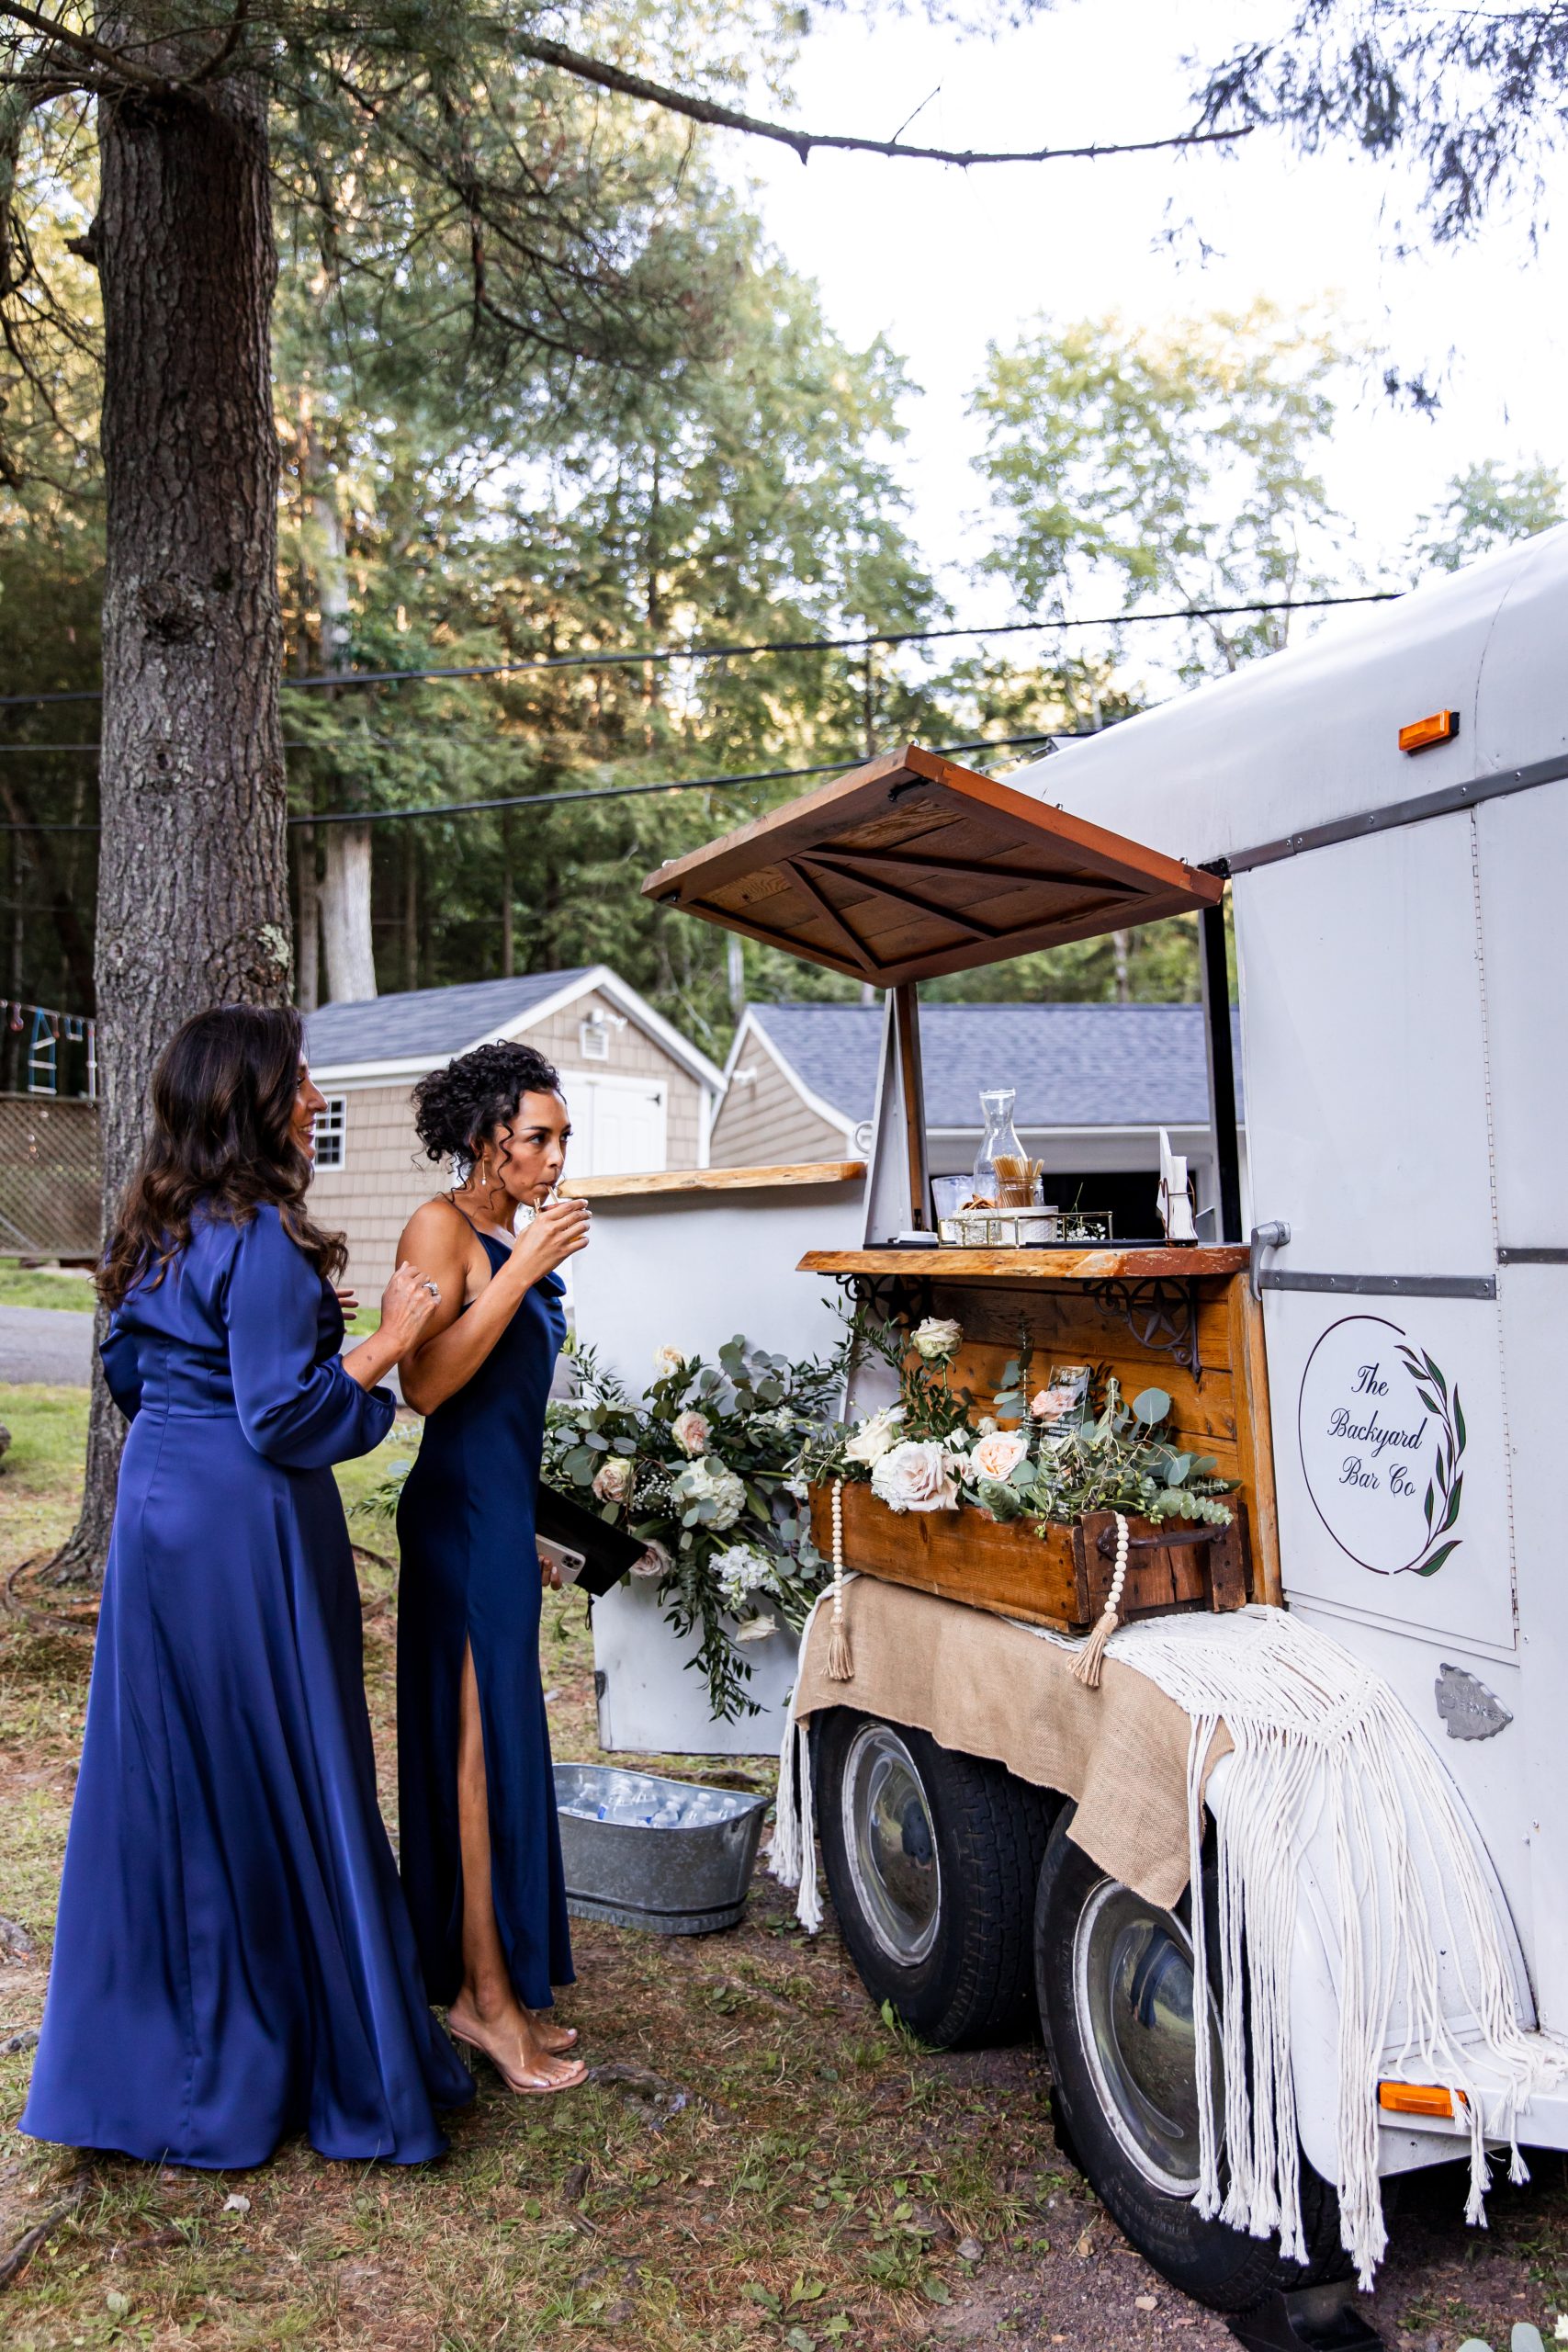 Hiring A Mobile Bar For Your Wedding With The Backyard Bar Co.